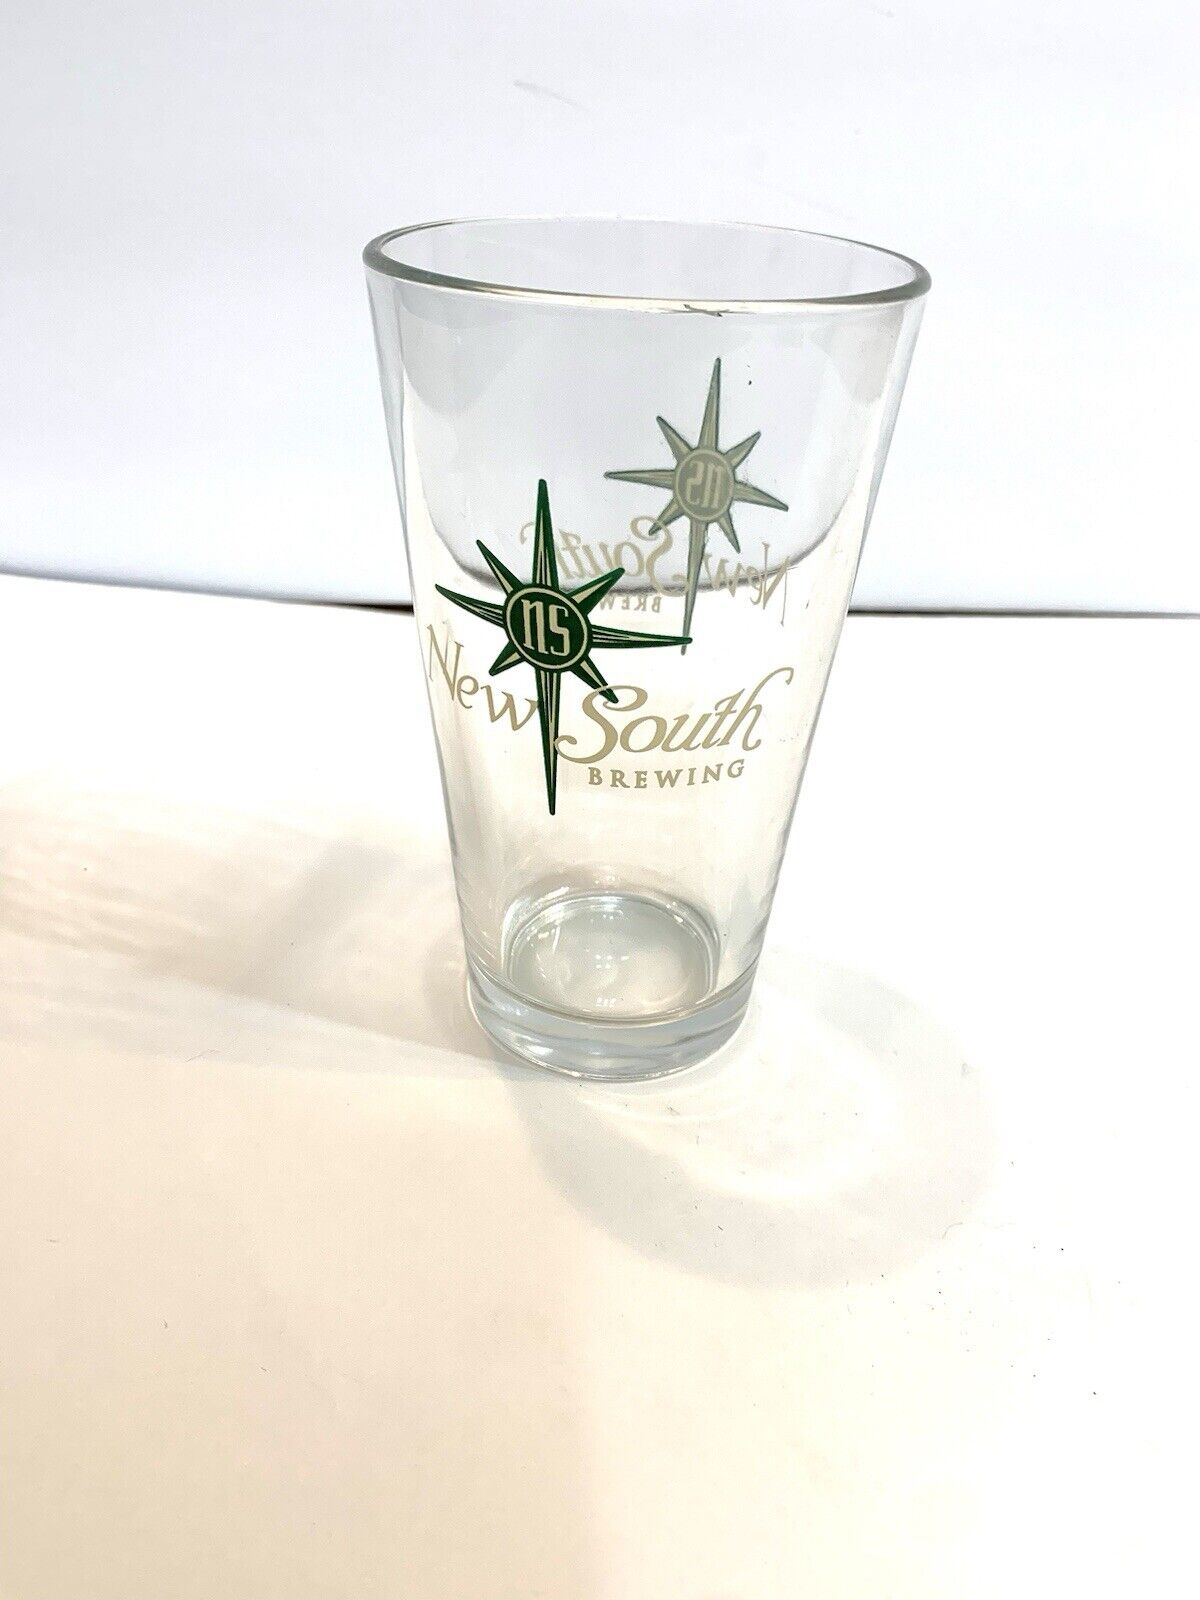 New South Brewing Beer Pint Glass